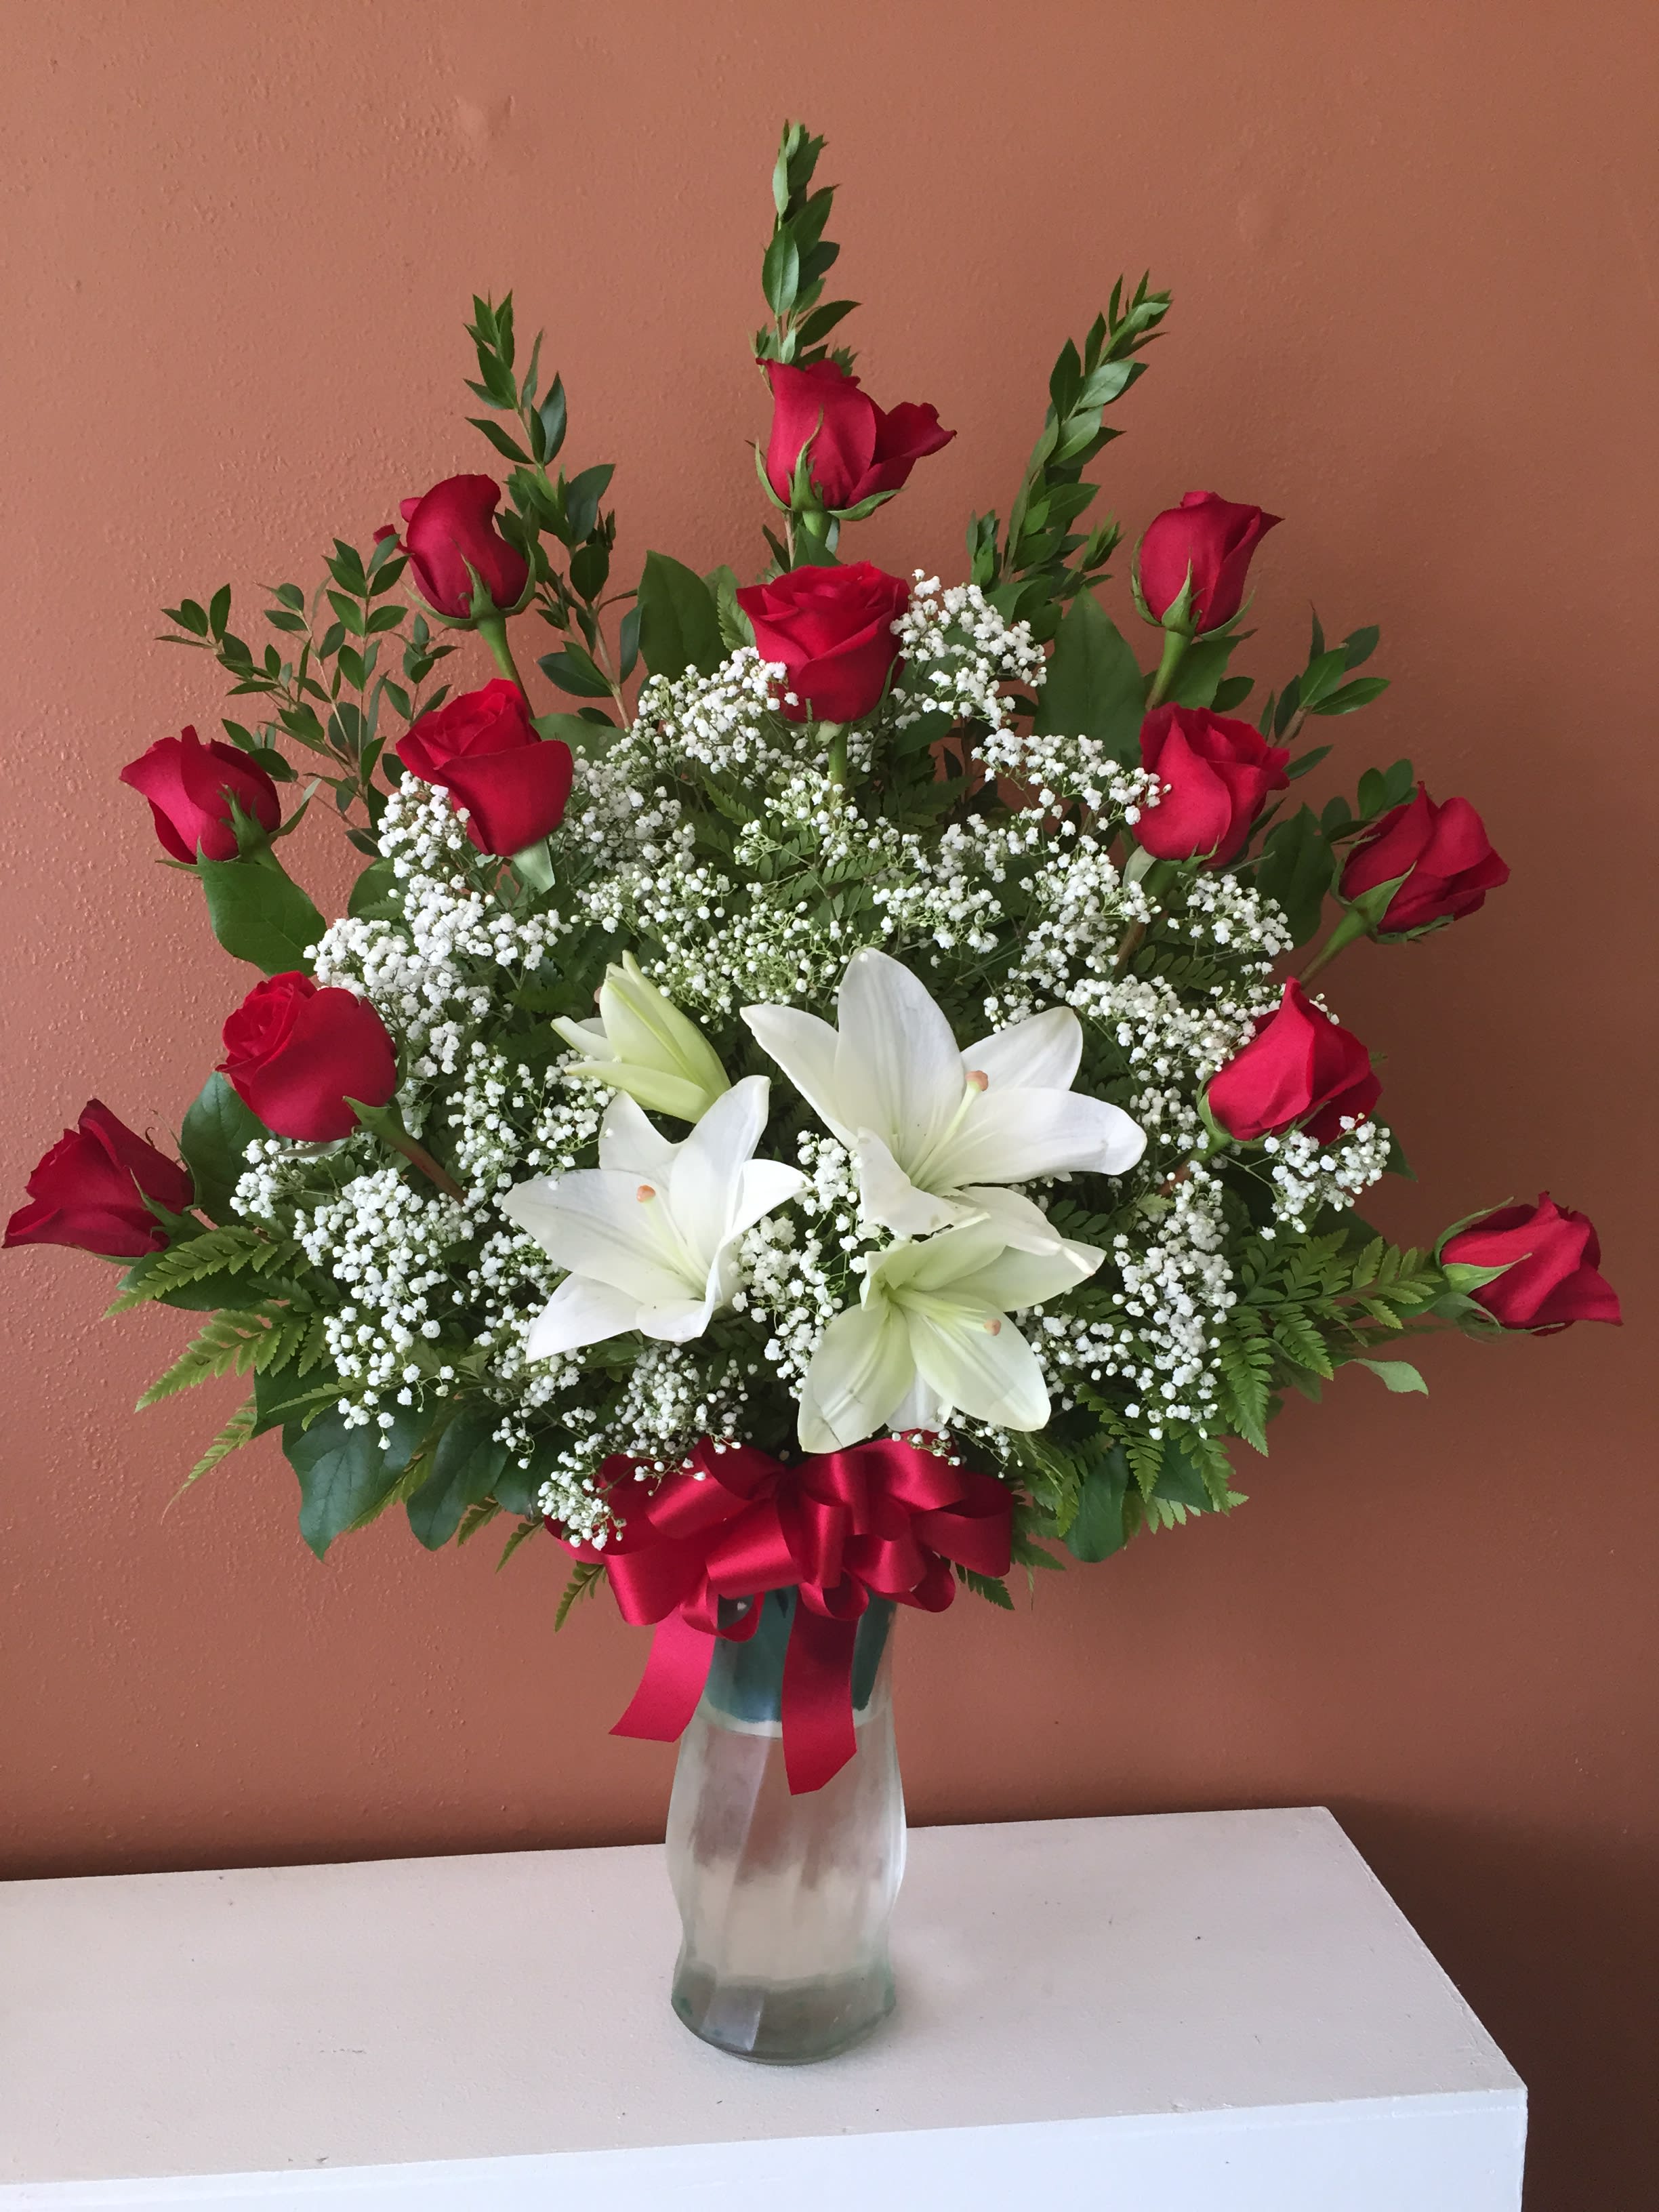 AA95 - Arrangement SUBSTITUTION POLICY – Always deliver the freshest flowers! Please note the bouquet pictured reflects our original design.  If the exact flowers or container in this arrangement are not available, our local florists will create a beautiful bouquet with the freshest available flowers.